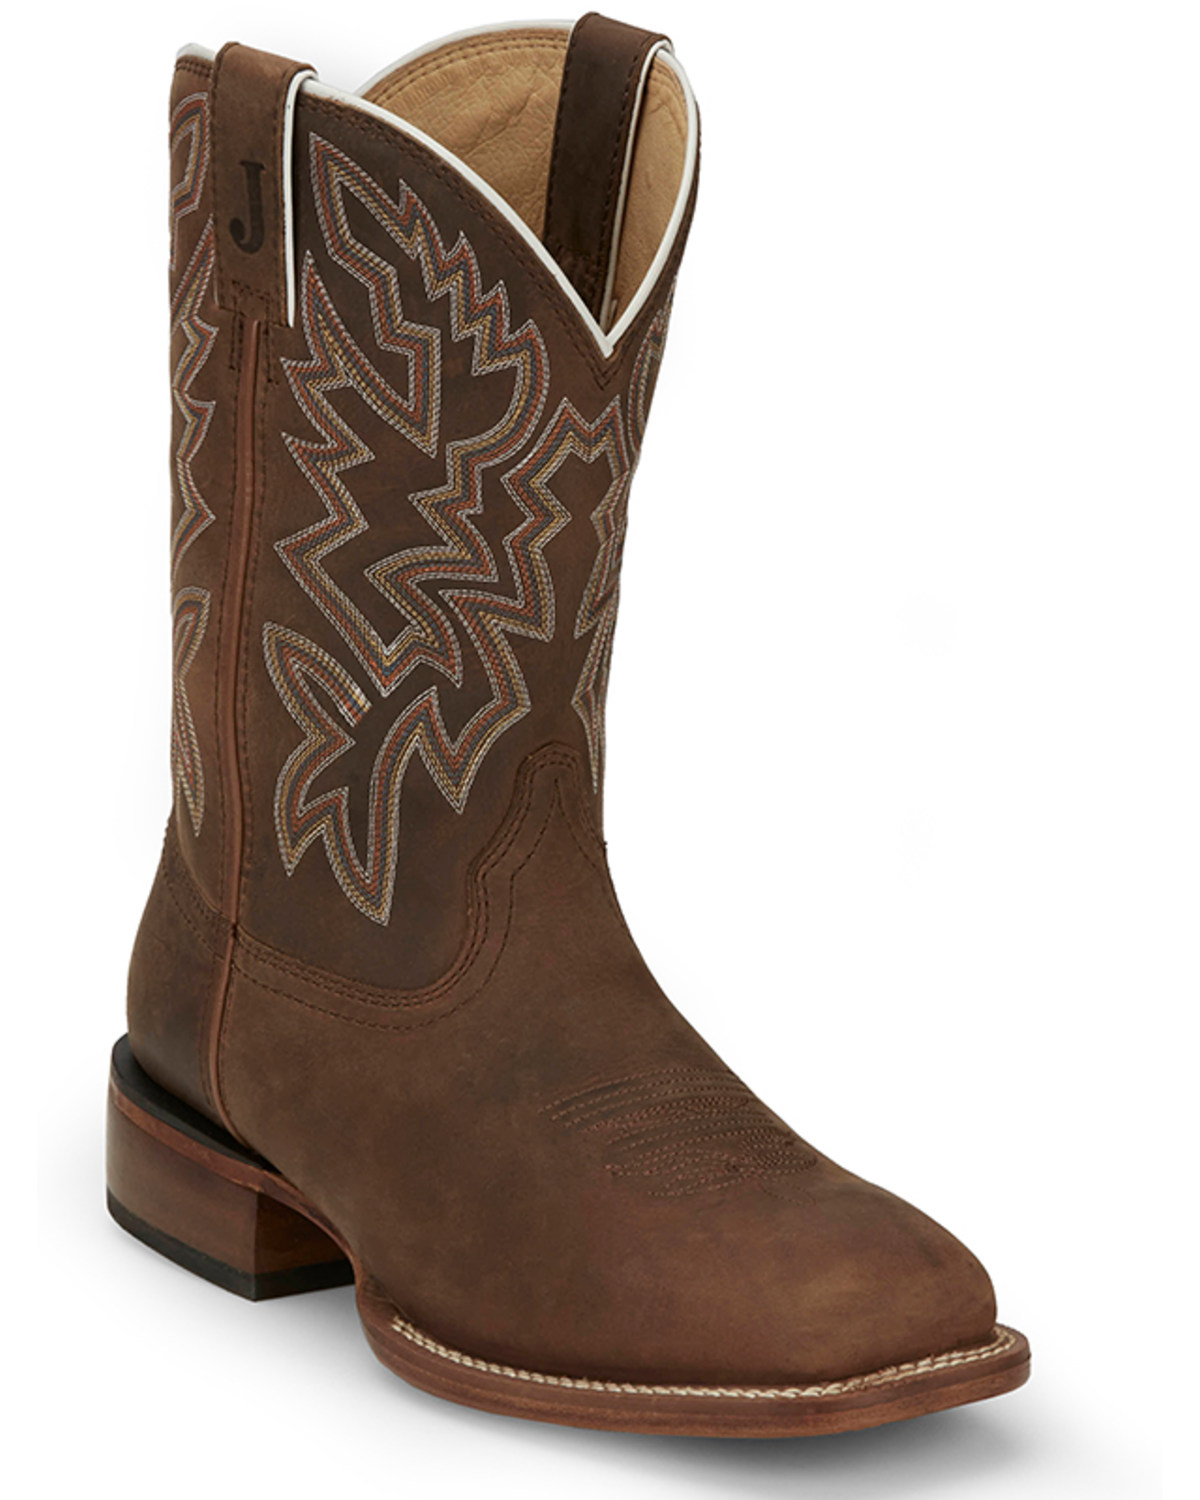 Justin Men's Frontier Western Boots - Broad Square Toe